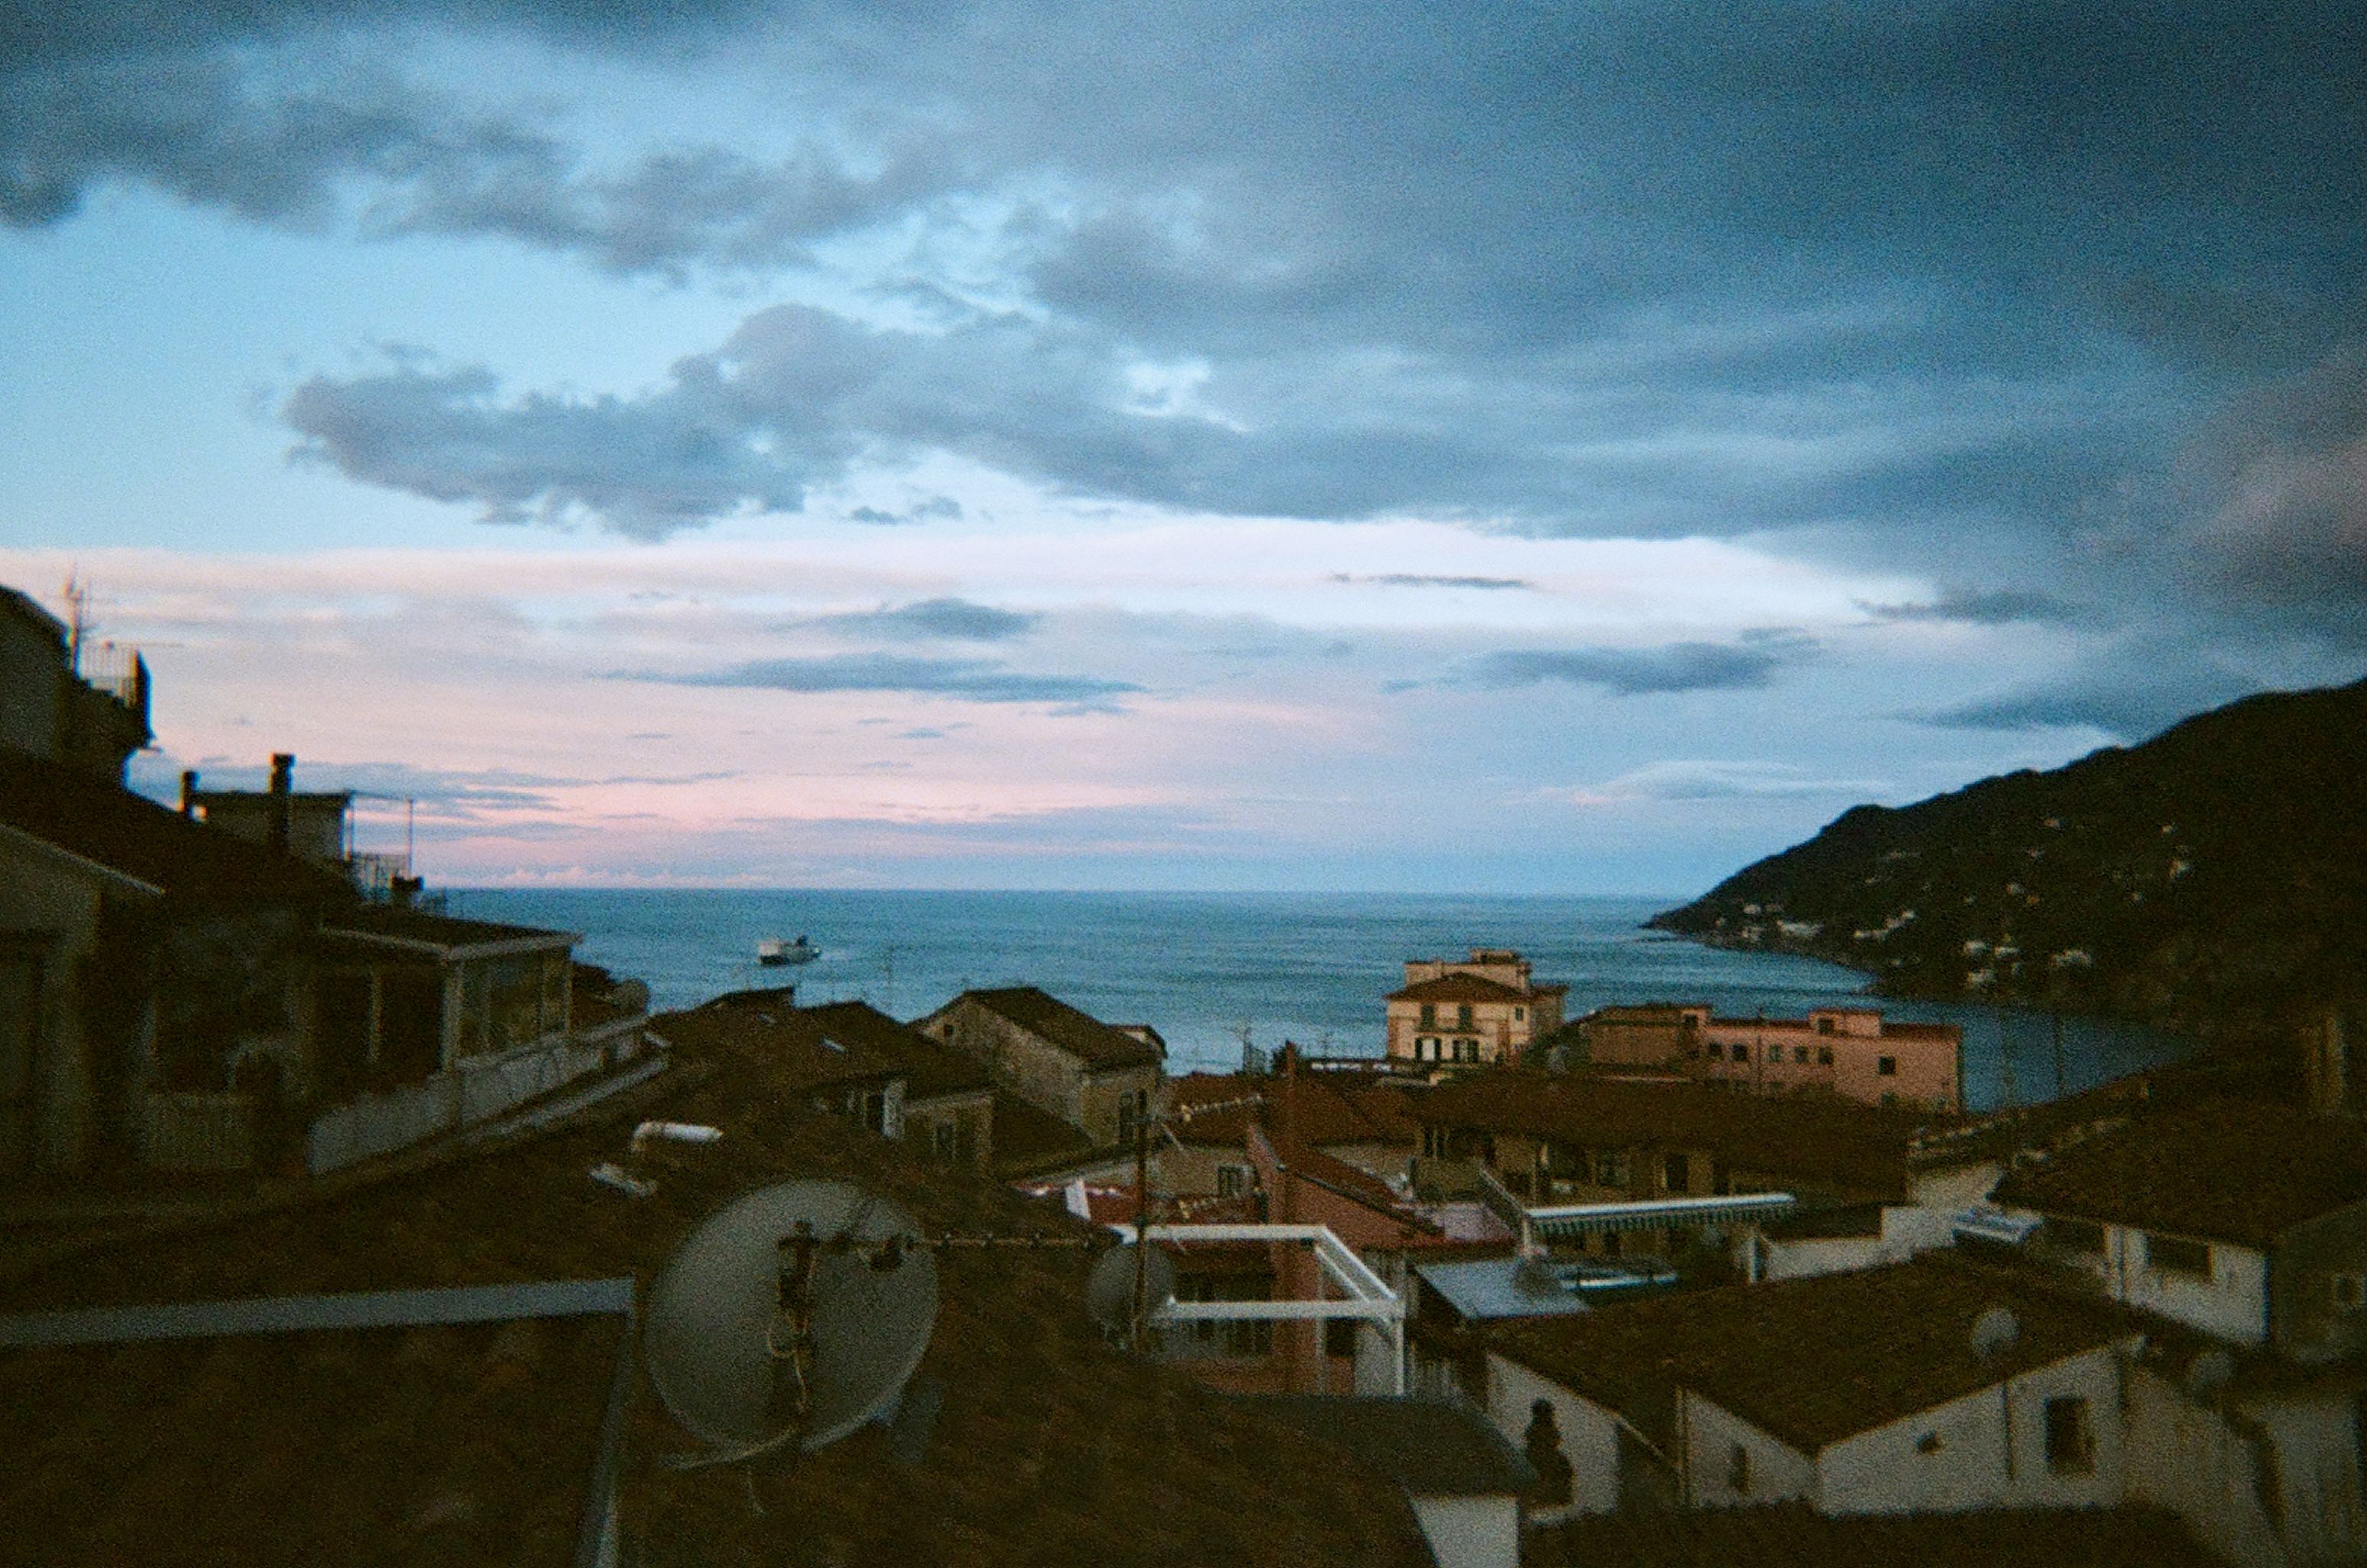 A serene coastal scene at sunrise, featuring the rooftops of a small town overlooking the calm sea. The sky is painted with hues of blue and pink as clouds drift overhead. A boat is visible in the distance on the water, and the silhouette of a mountainous coastline frames the right side of the image